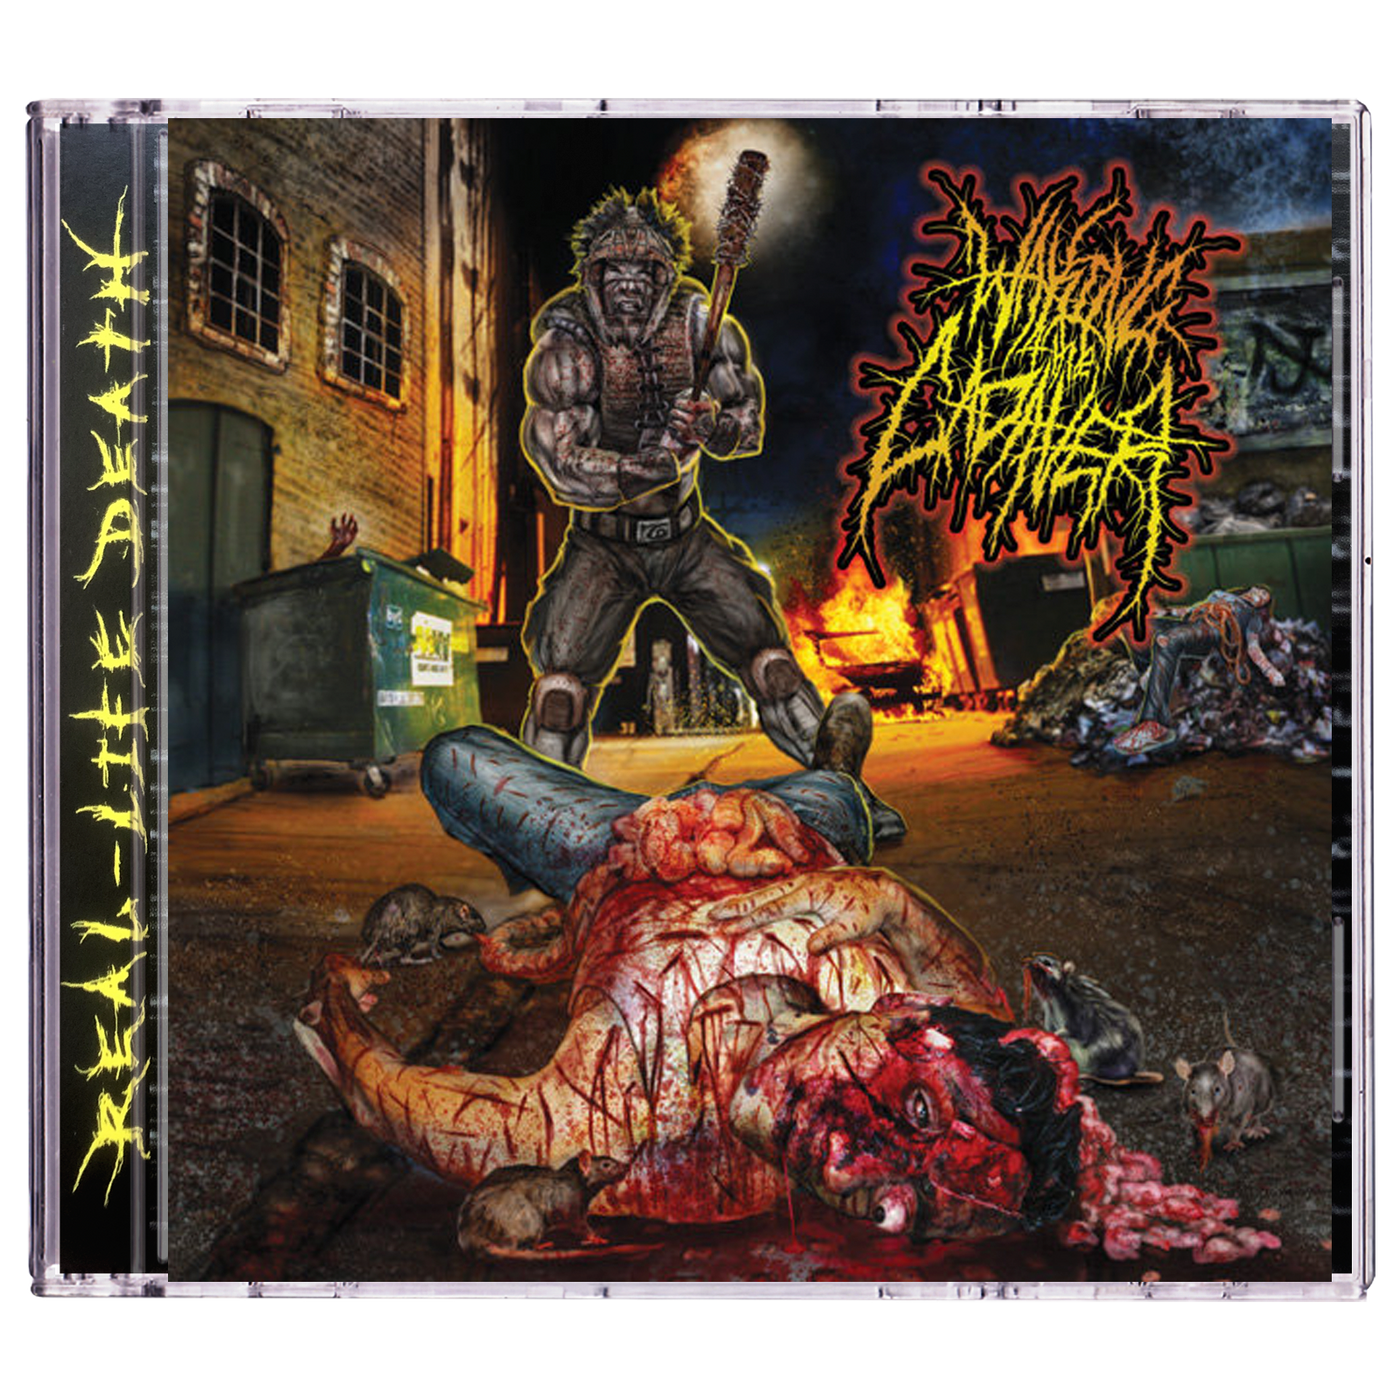 Waking The Cadaver 'Real-Life Death' CD